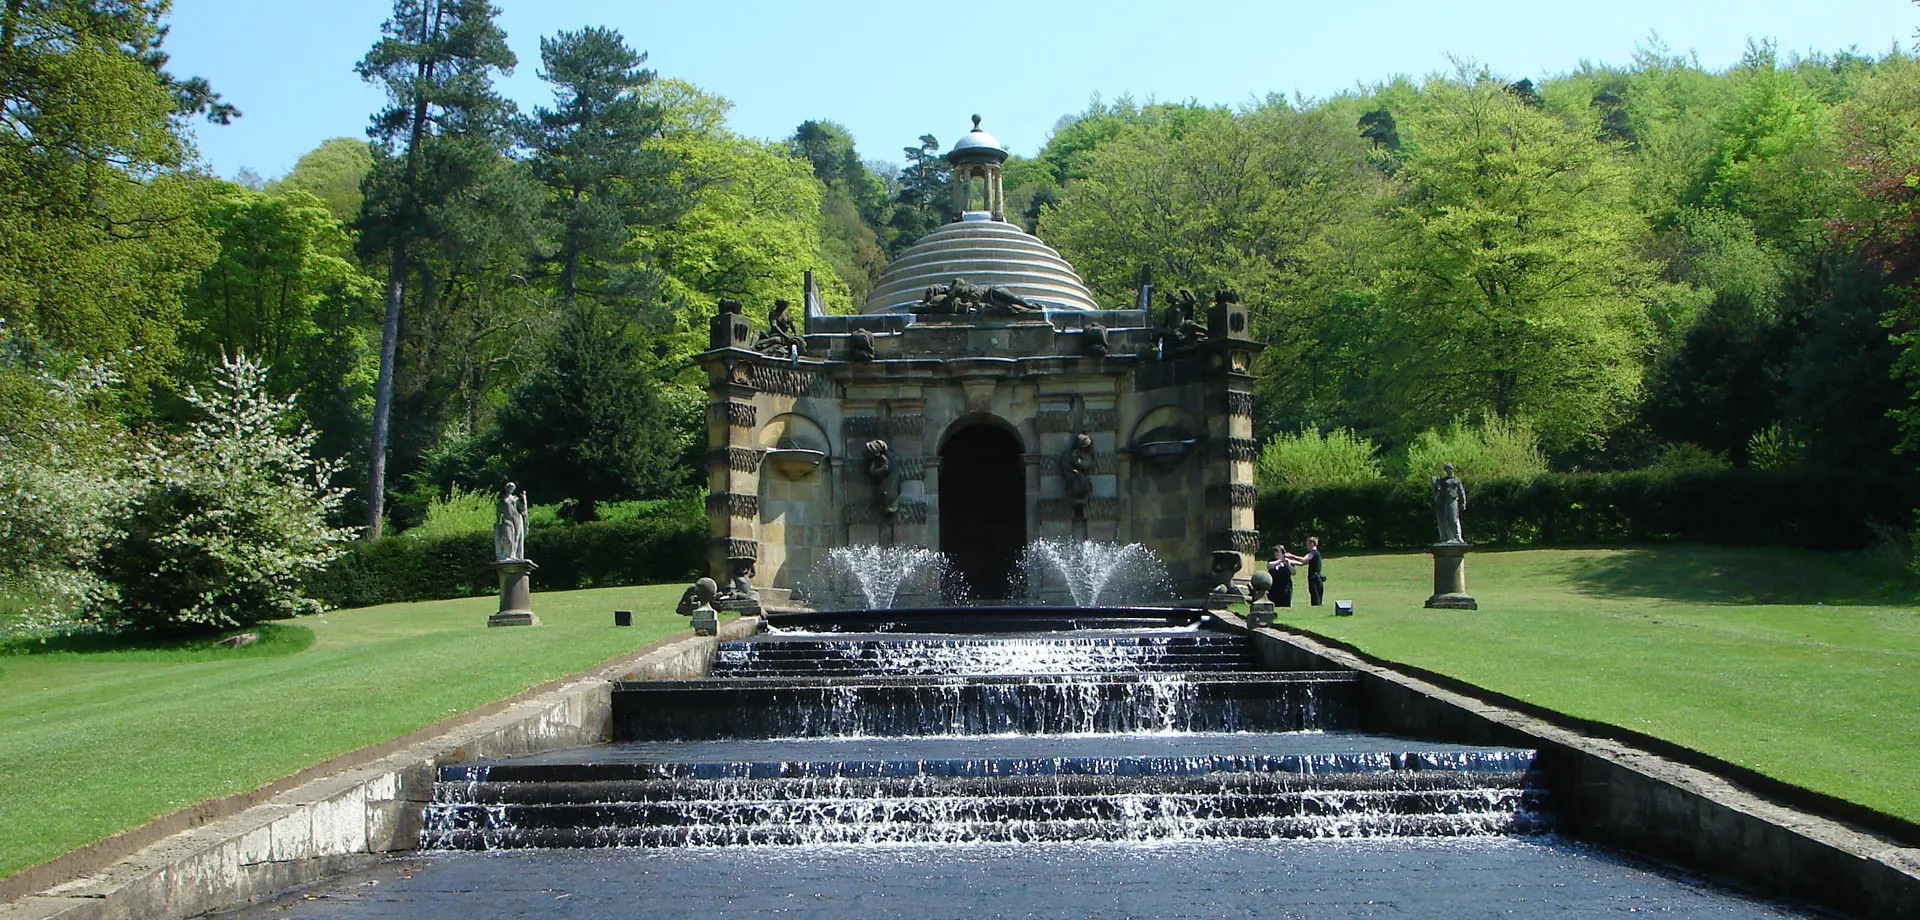 Early 18th century stone temple with carvings from which water descending down a series of stone steps, grass either side and trees behind it